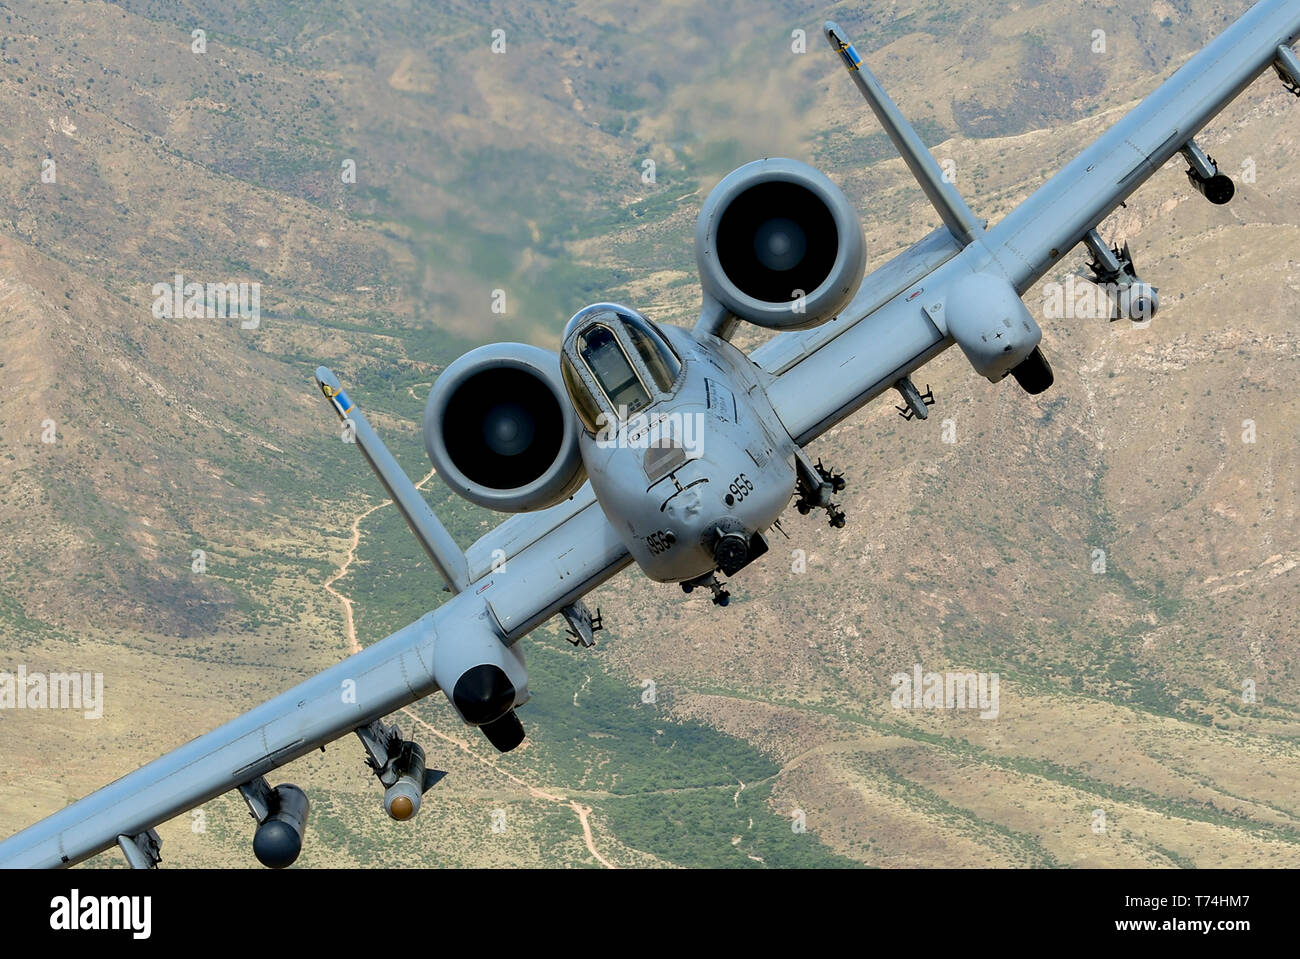 An A-10C Thunderbolt II flies over southern Arizona, April 29, 2019.  The A-10 is the Air Force's premier close air support aircraft, providing invaluable protection to troops on the ground. (U.S. Air Force photo by Staff Sgt. Betty R. Chevalier) Stock Photo